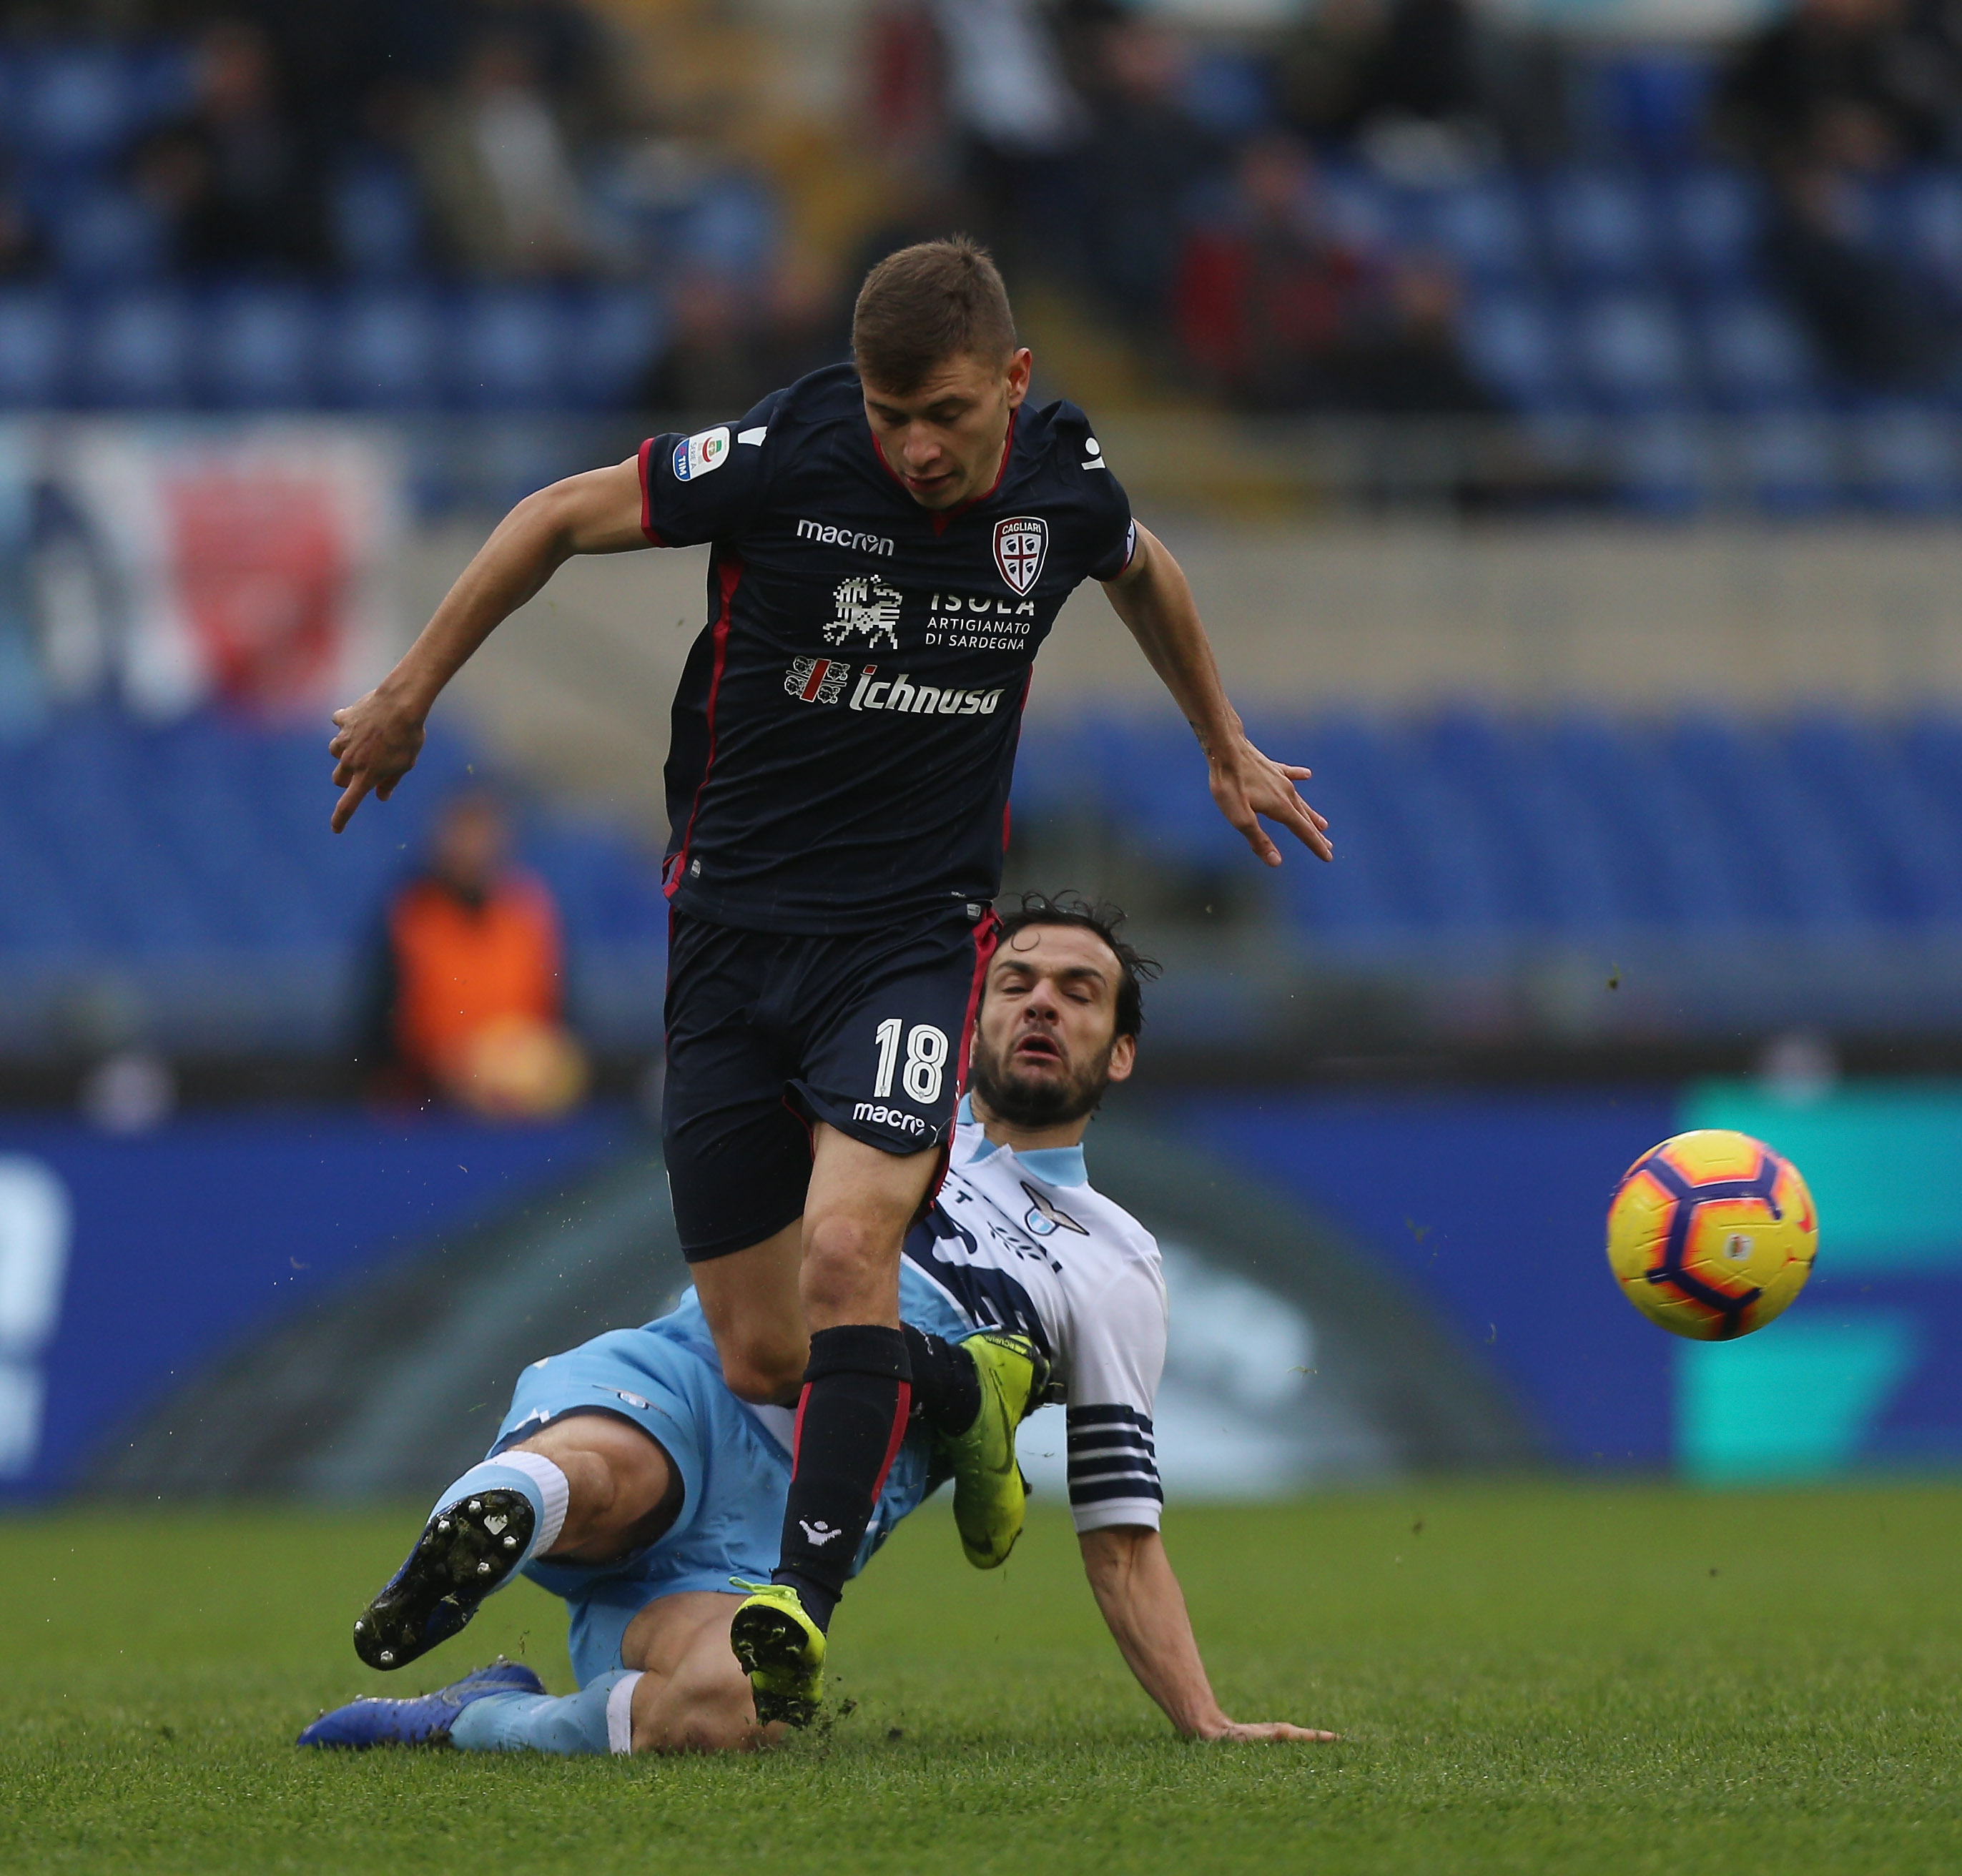 ROME, ITALY - DECEMBER 22: Nicolo' Barella of Cagliari and Parco Parolo of SS Lazio in action during the Serie A match between SS Lazio and Cagliari at Stadio Olimpico on December 22, 2018 in Rome, Italy. (Photo by Paolo Bruno/Getty Images)